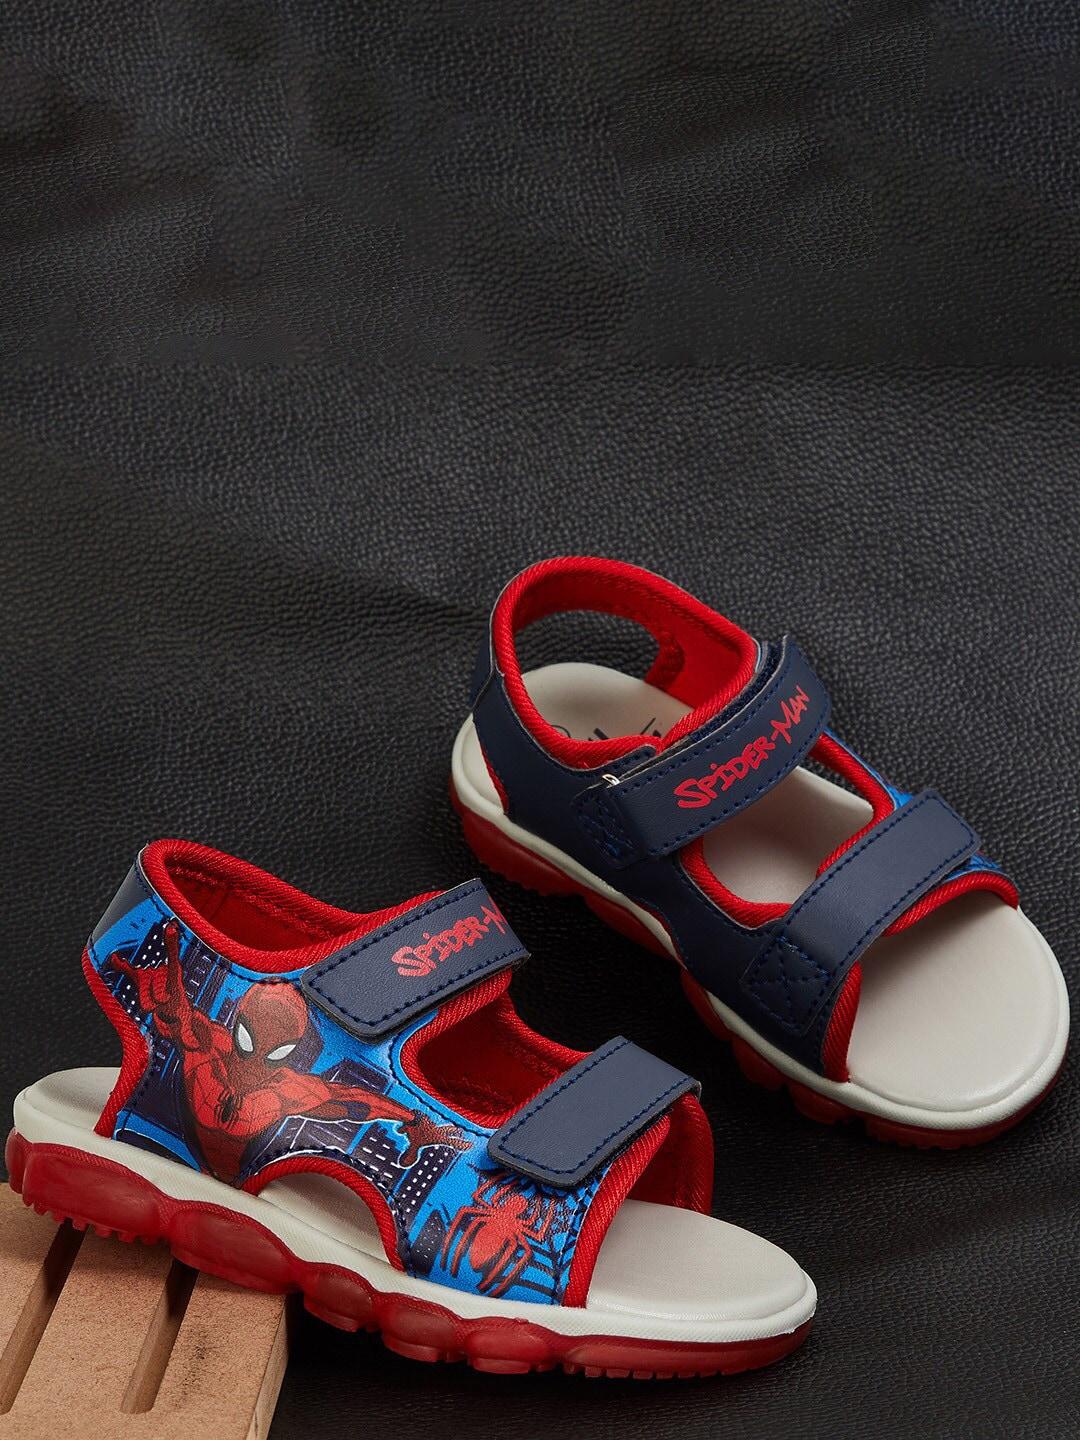 fame-forever-by-lifestyle-boys-comfort-sandals